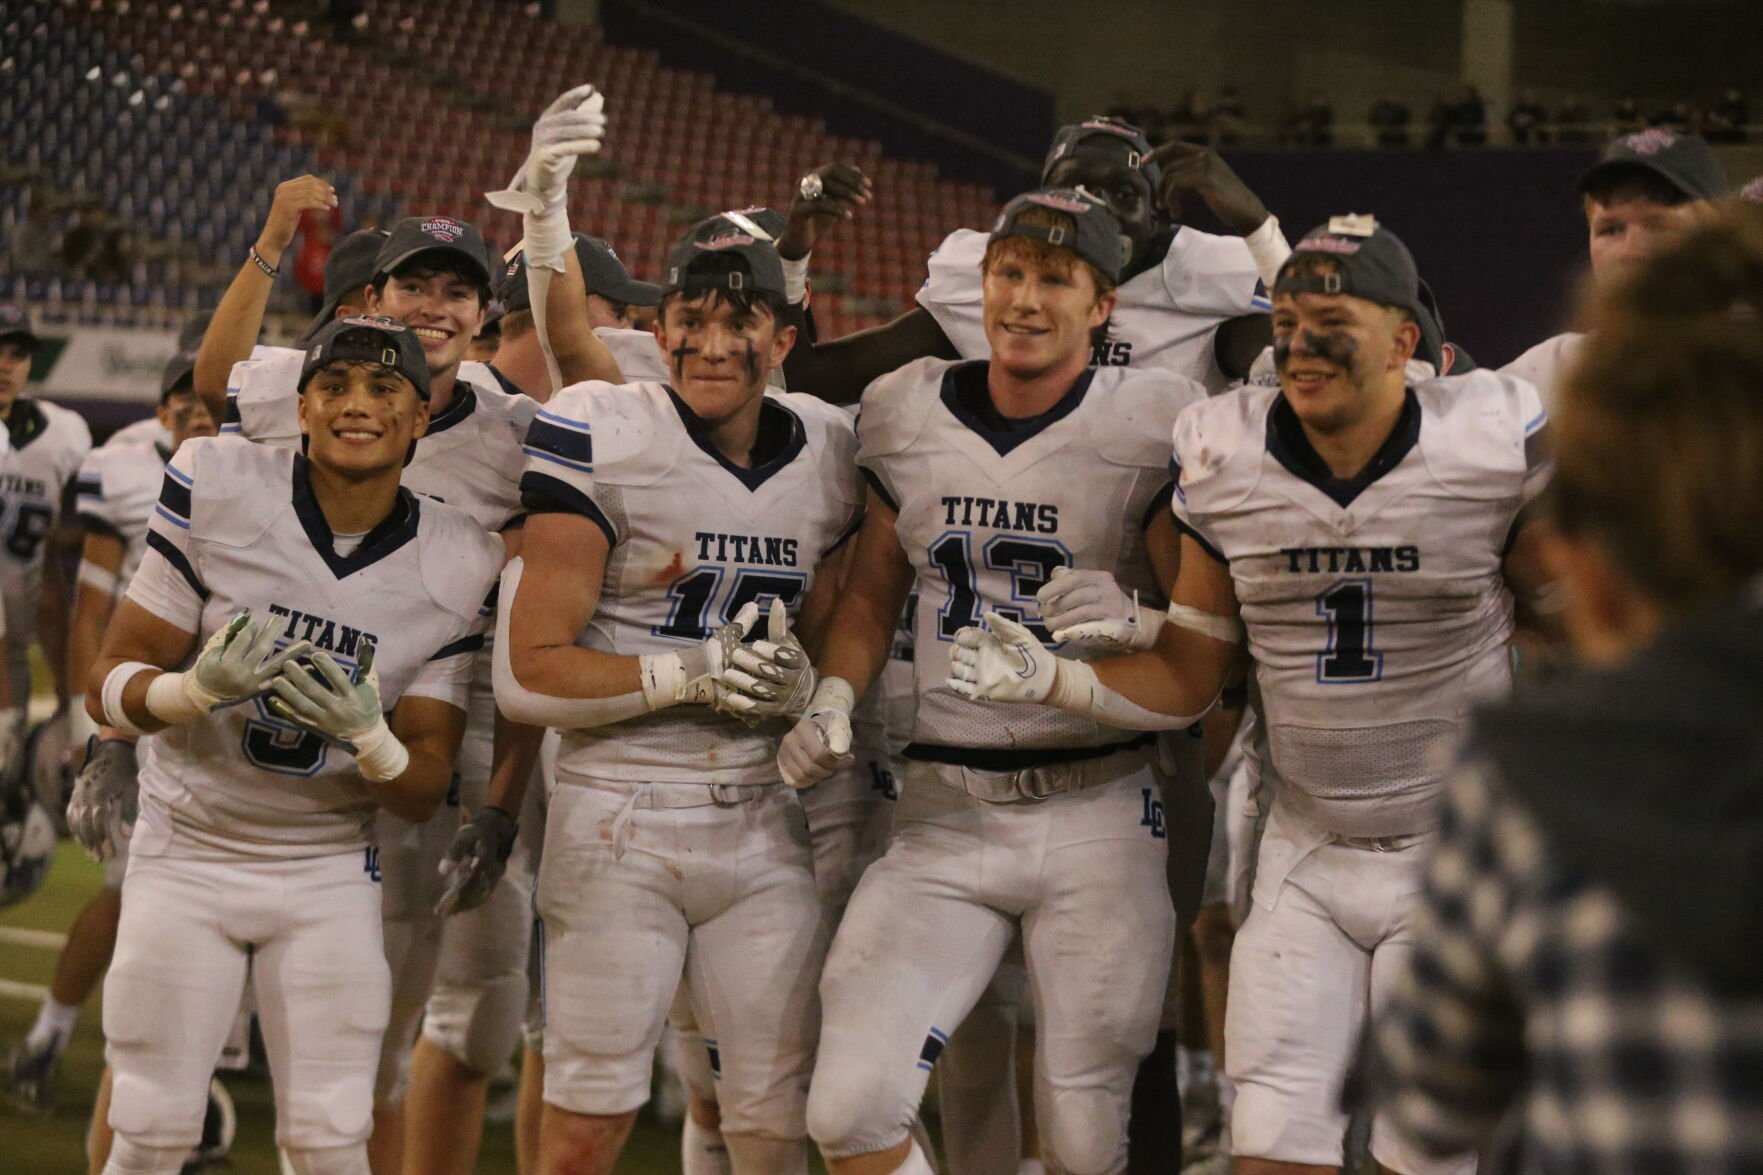 Lewis Central Football’s Depth and Resilience Leads to Second Title Win